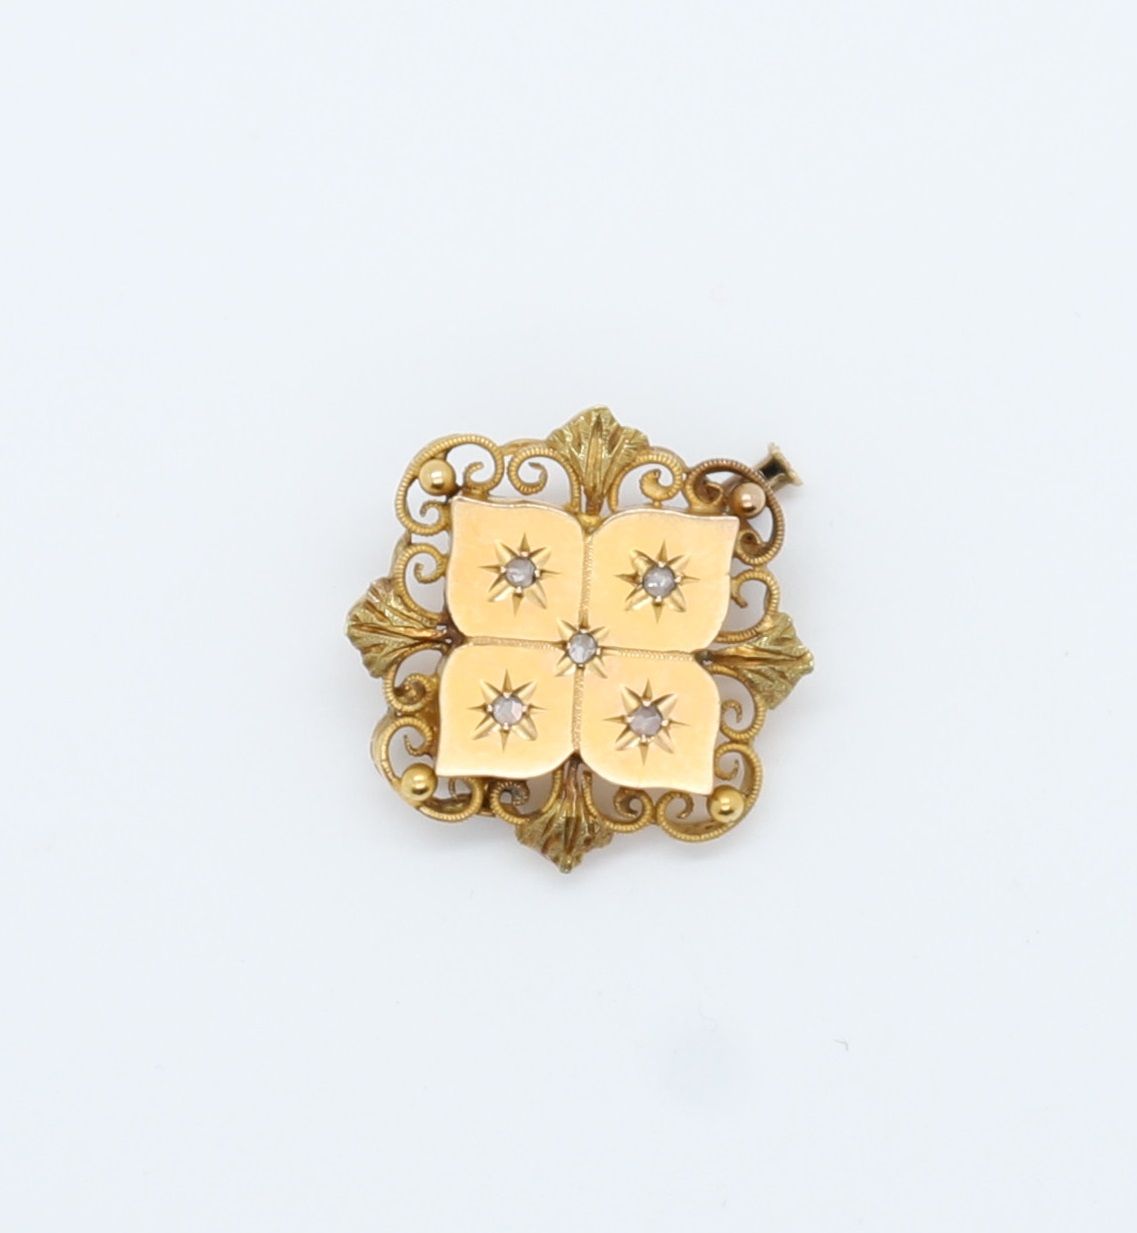 Null YELLOW GOLD "STYLIZED SNOWFLAKE" BROOCH
Decorated with engraved stars enhan&hellip;